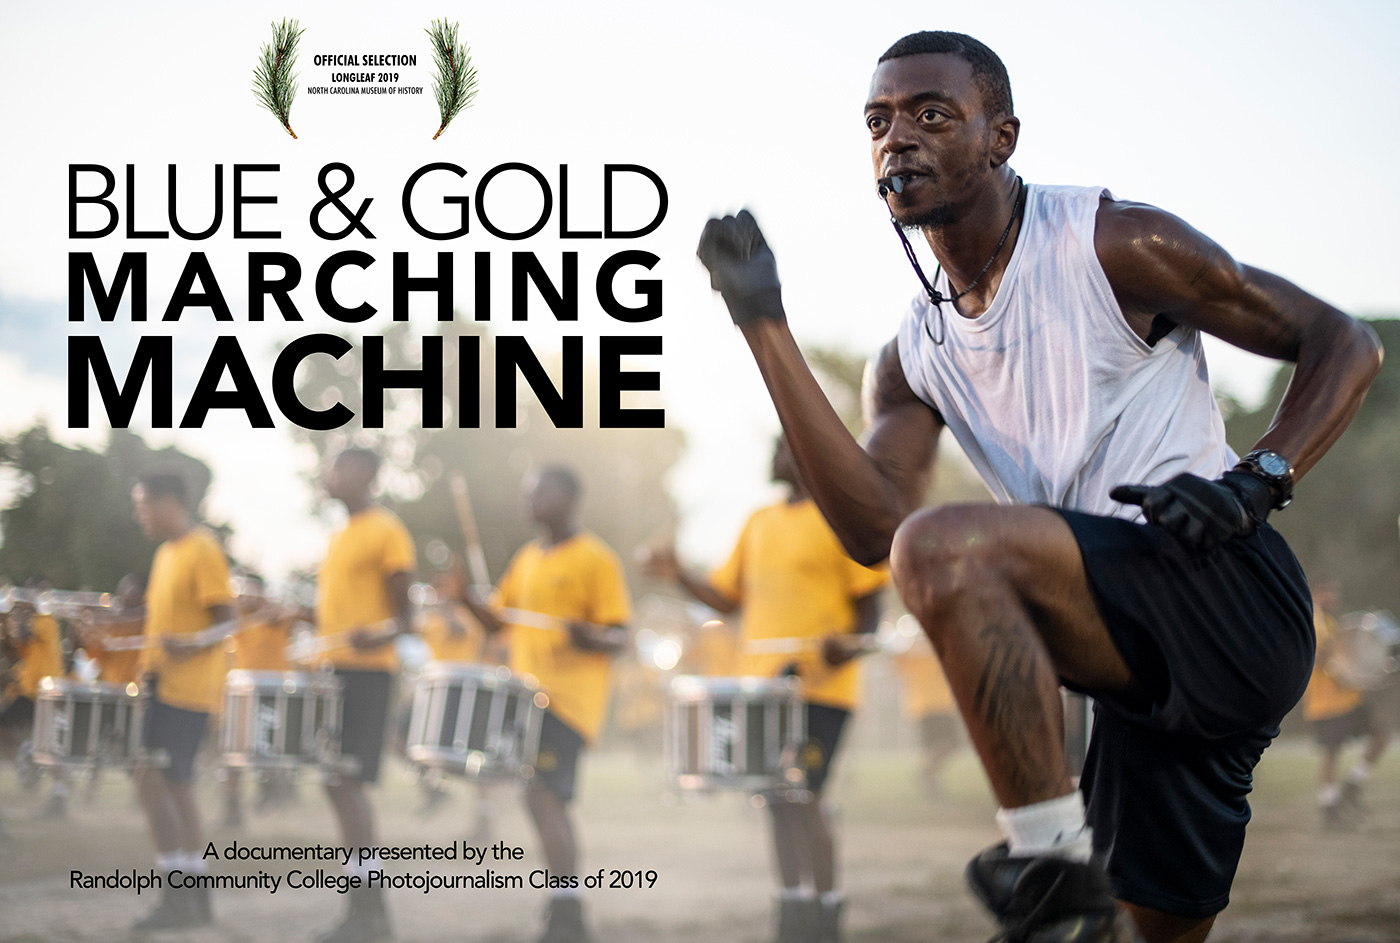 Randolph Community College photojournalism students' documentary, “Blue & Gold Marching Machine,” is an official selection for the Longleaf Film Festival.